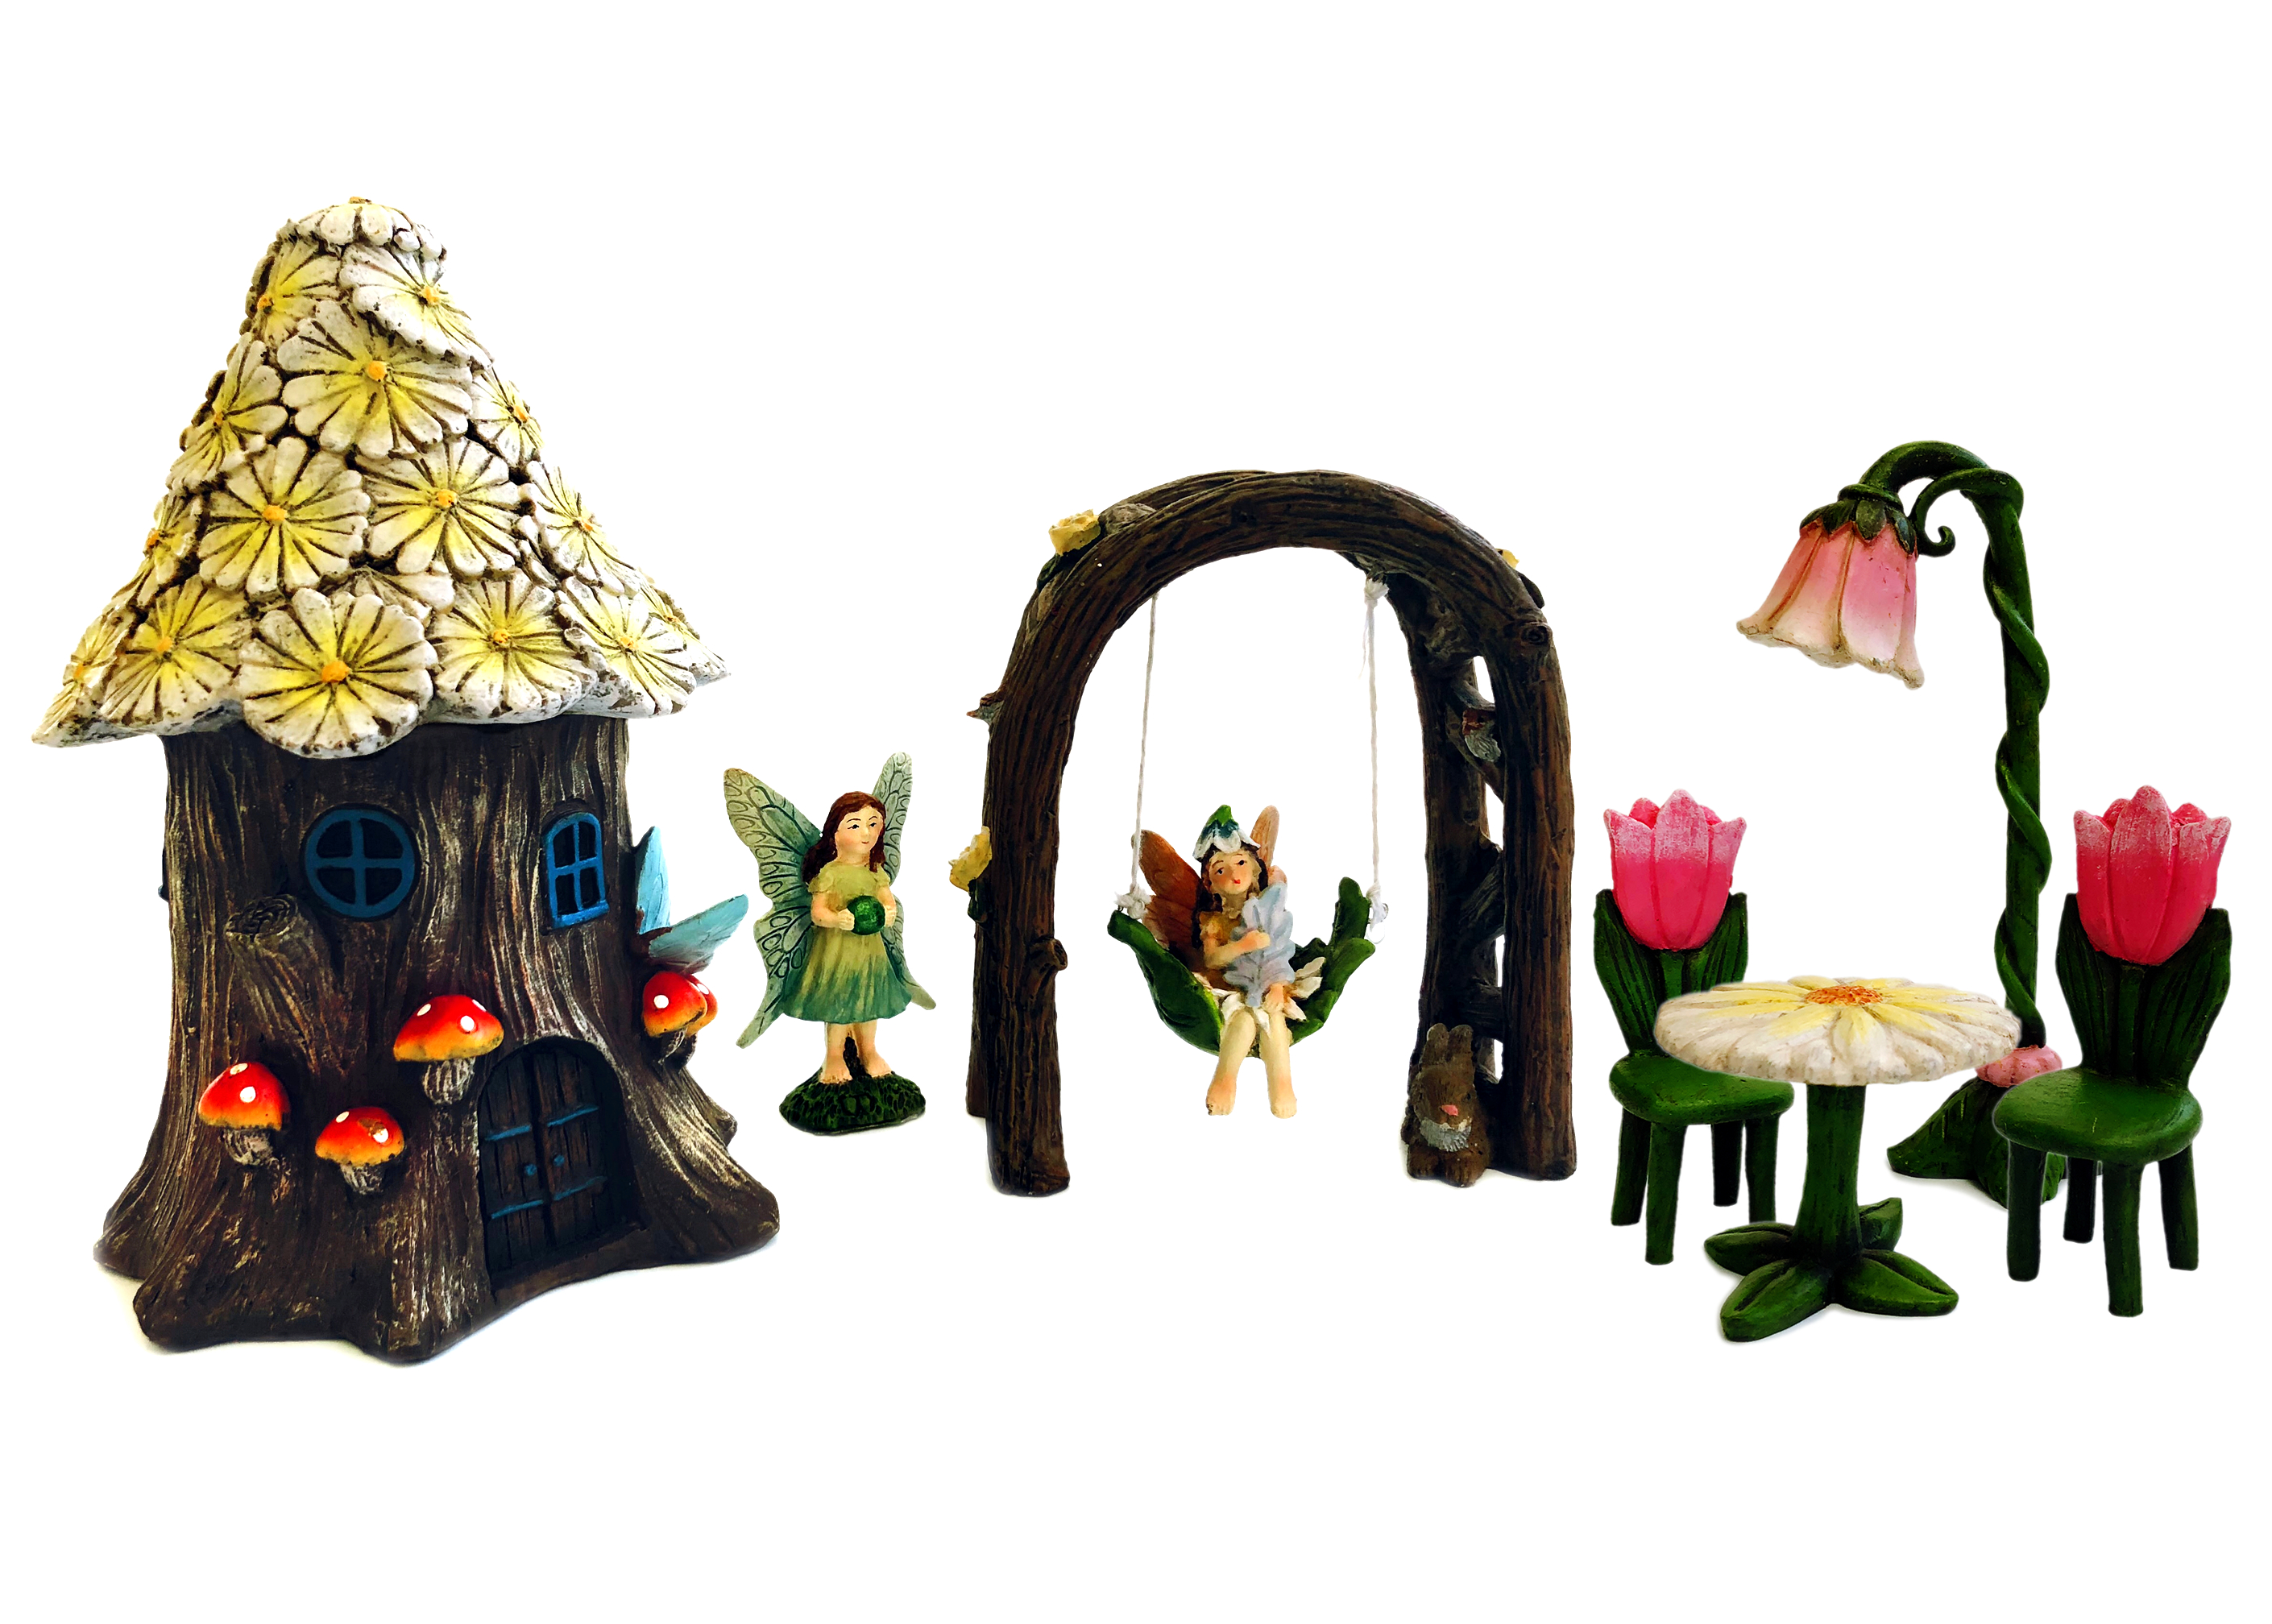 Bench Fairy with Orange Yellow Wings Blue Shirt Table Superior Home Arts Fairy Garden Accessories Metal Bridge and Fairy Bundle of 4 Miniature Items Fairy Garden Starter Kit